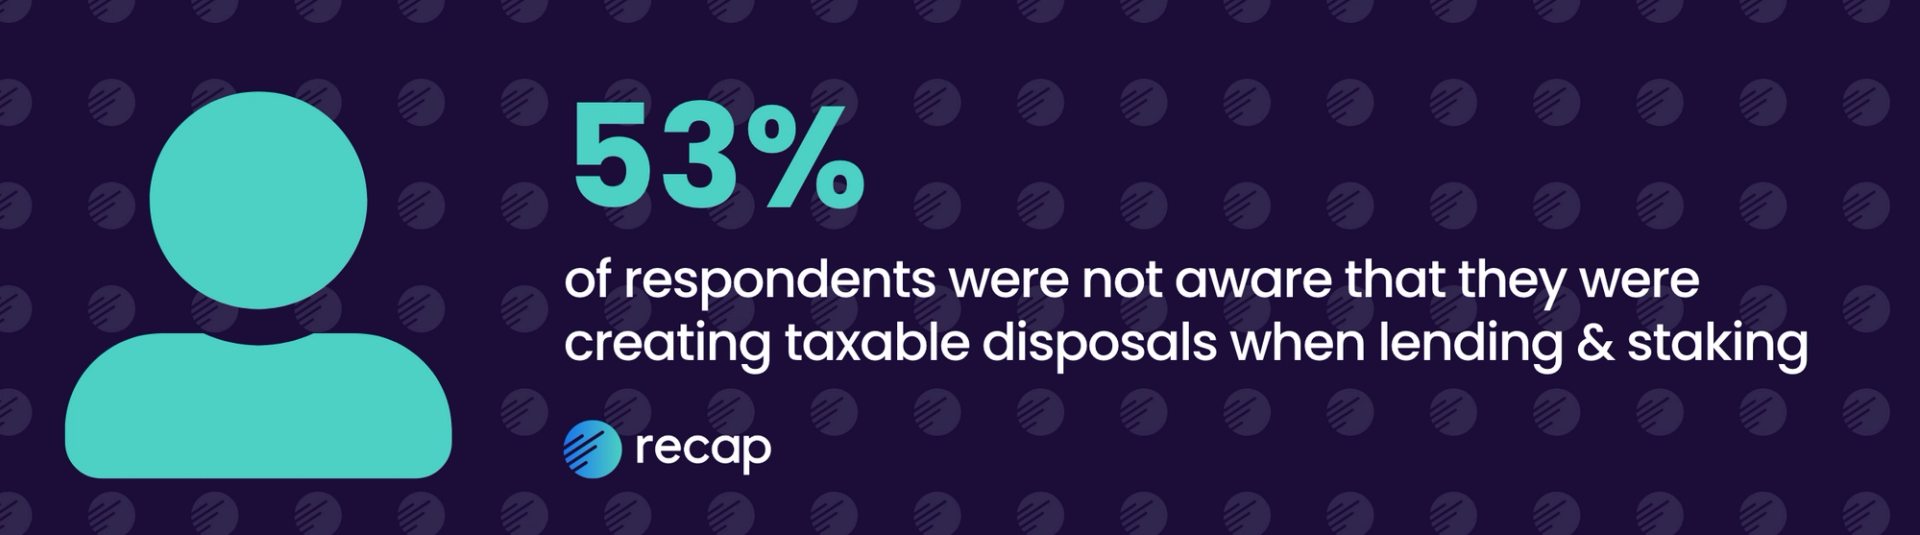 Infographic: 53% of respondents were not aware that they were creating taxable disposals when lending and staking.